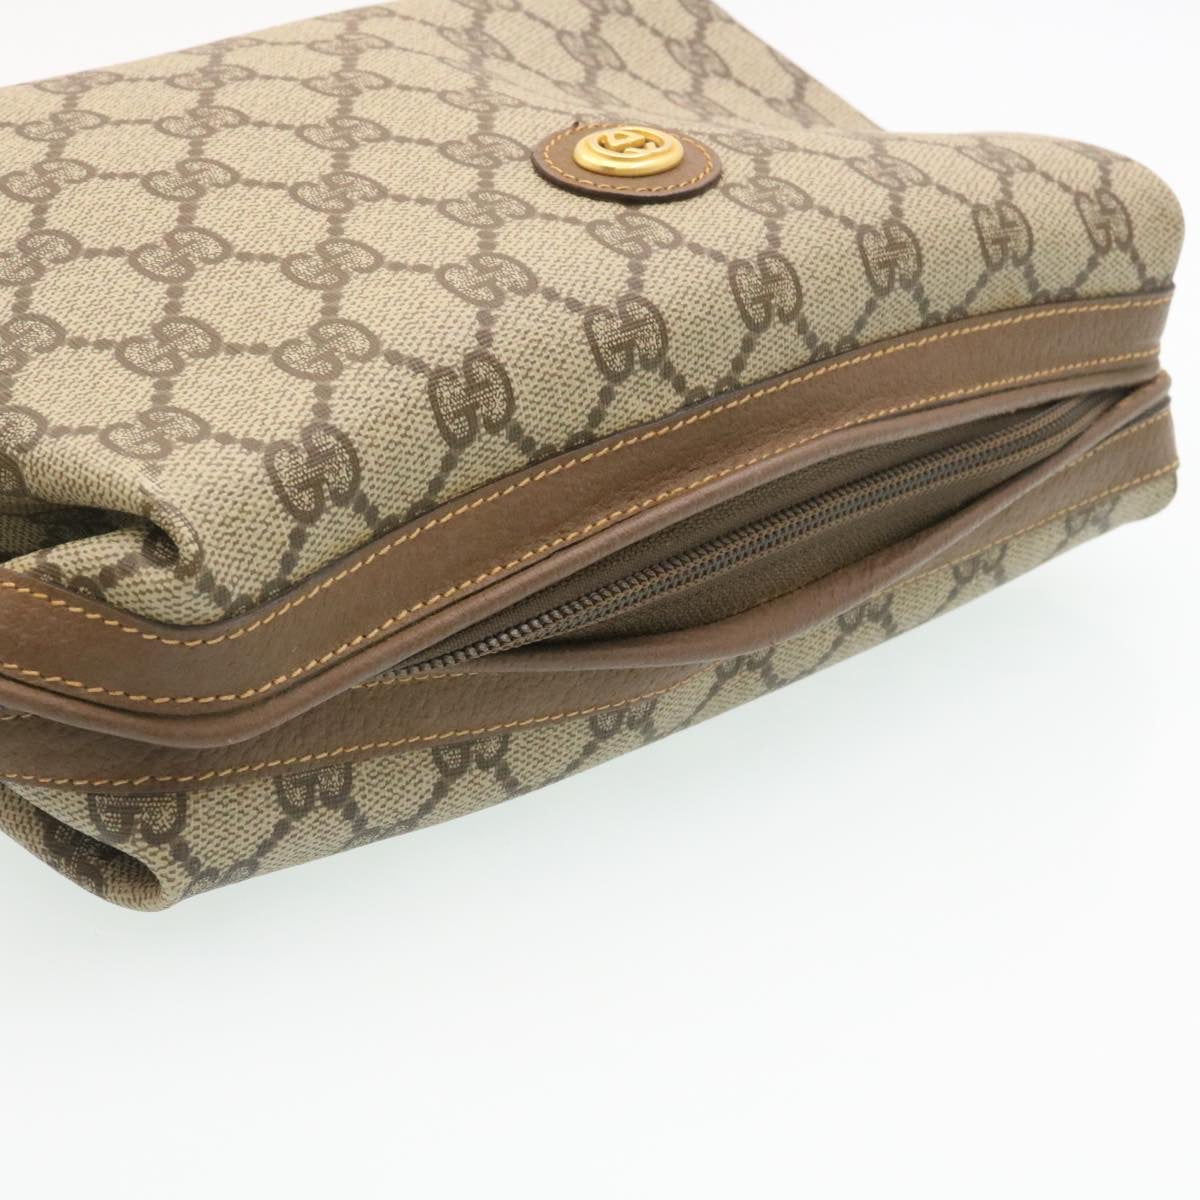 GUCCI GG Canvas Pouch PVC Leather Beige Auth ar6441